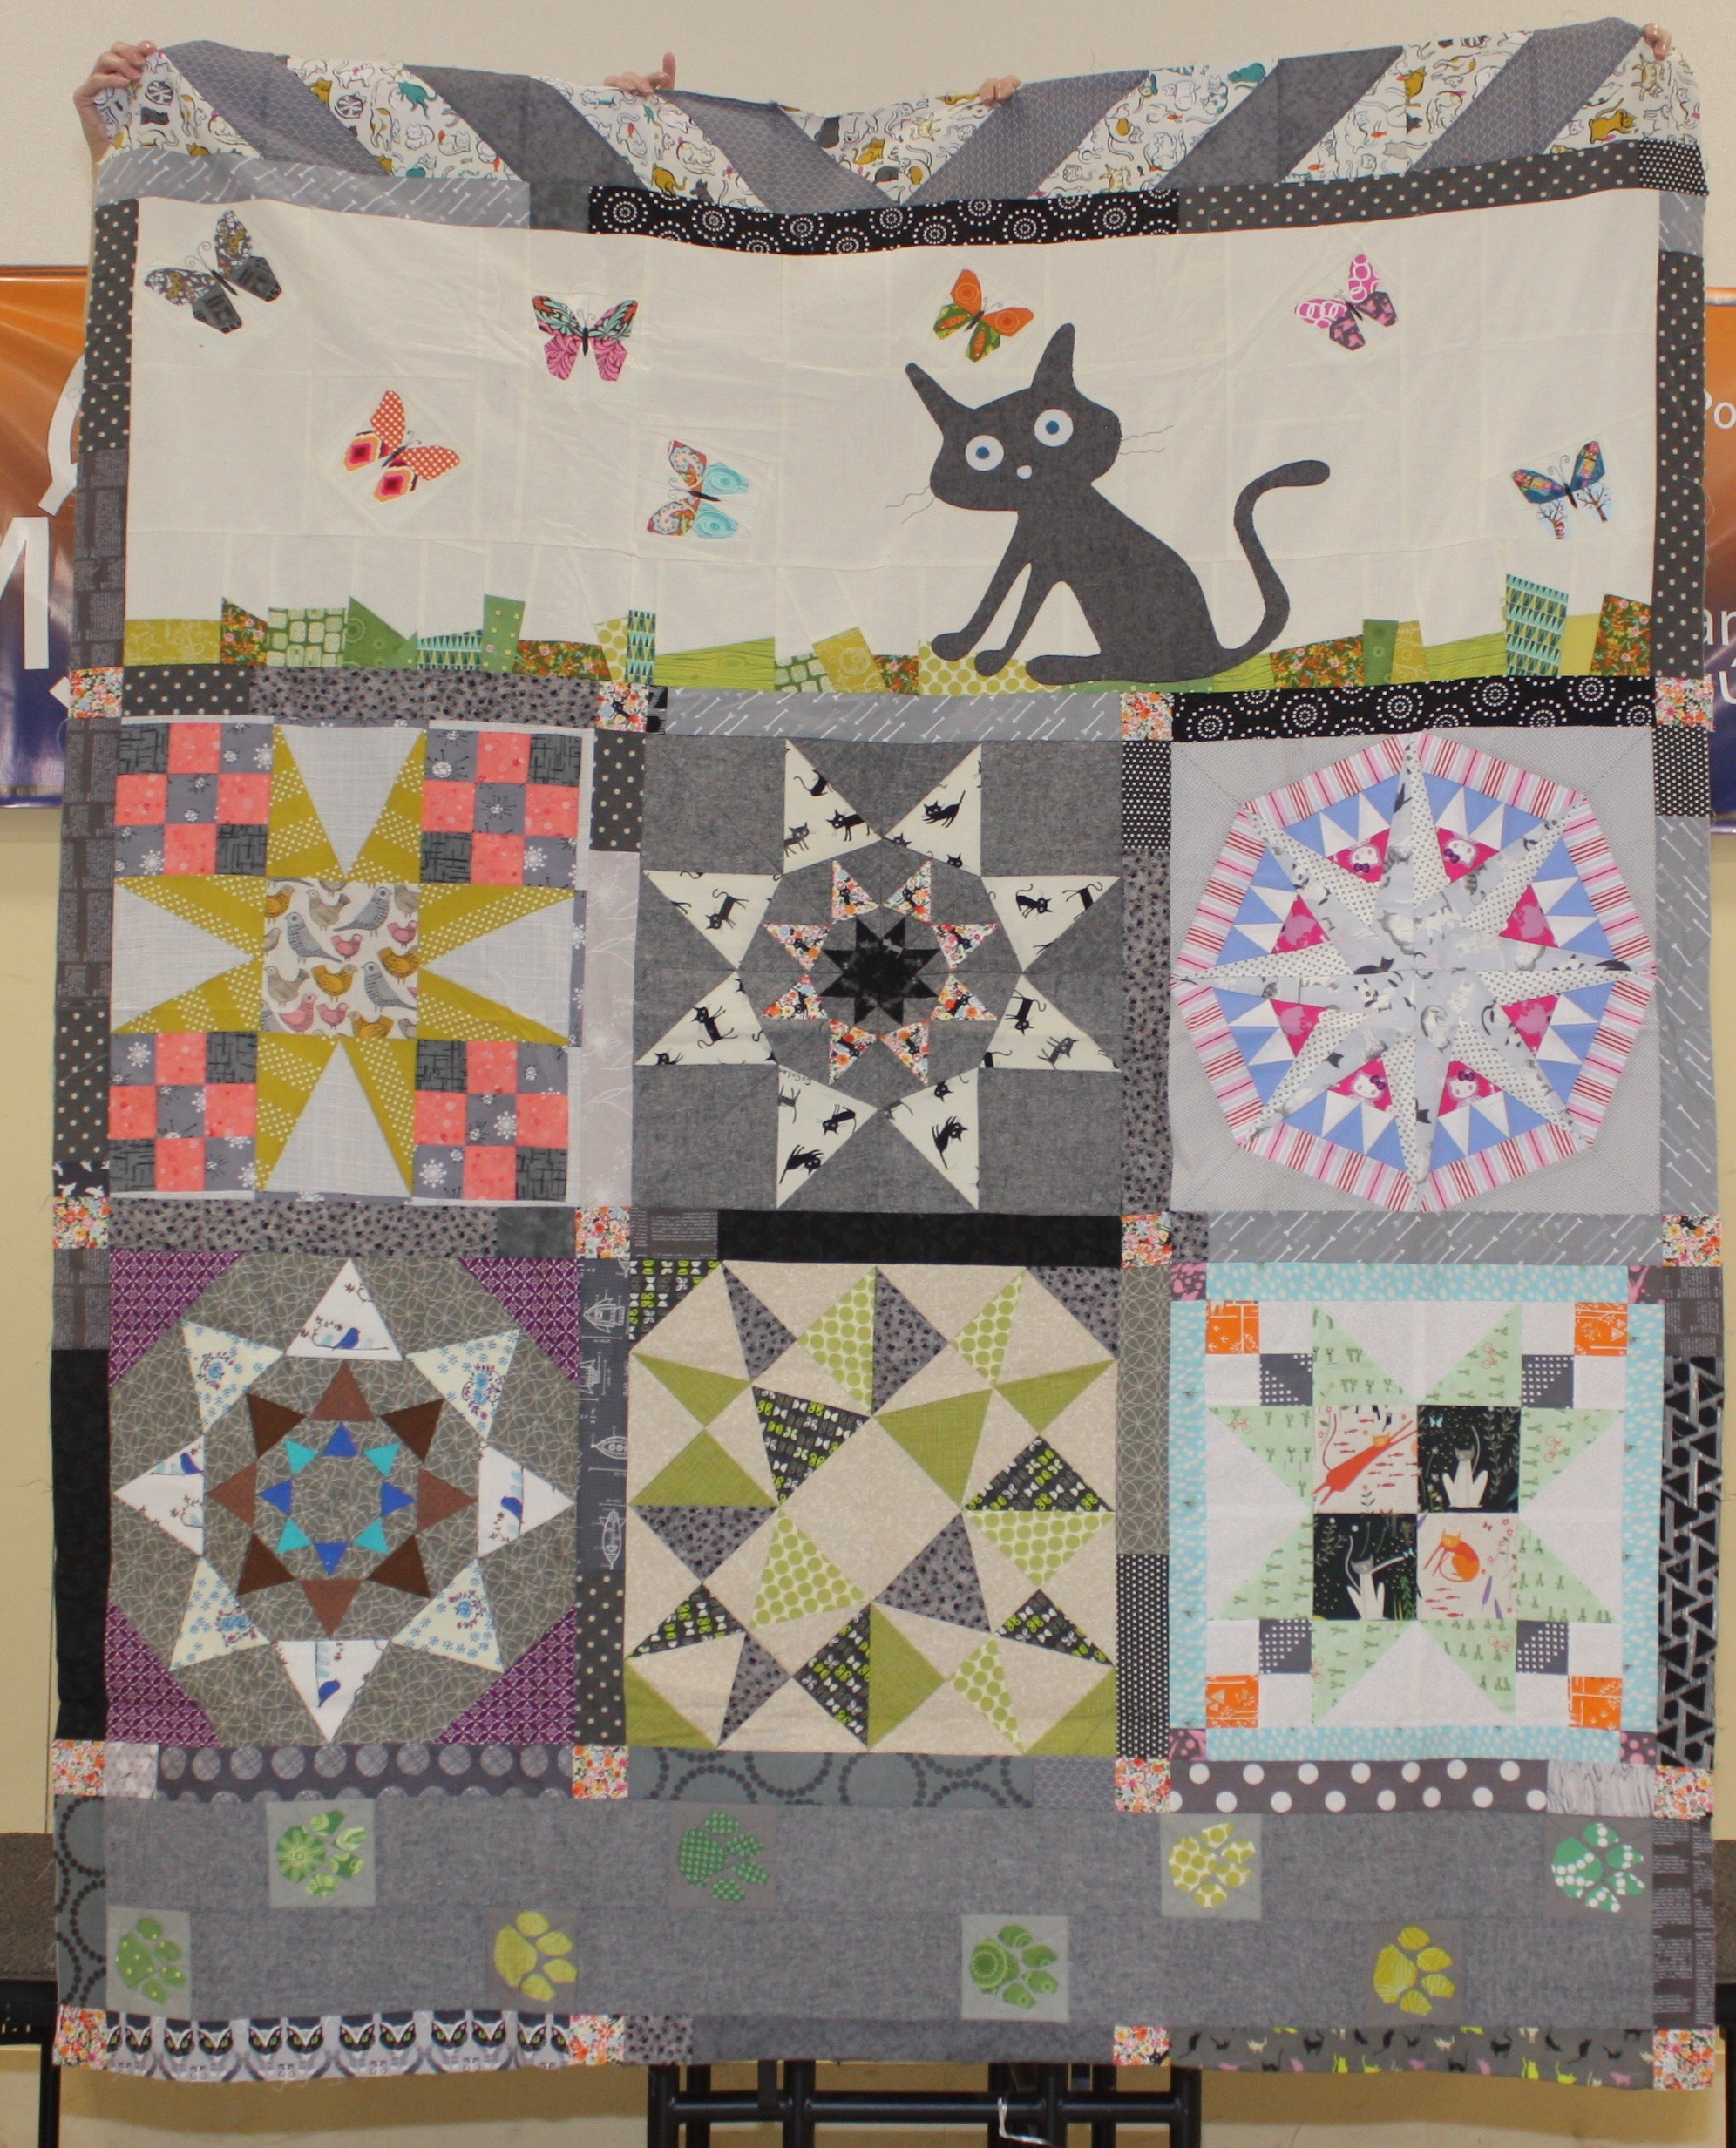  Elsa Hart  Kitty Star, blocks were made by various people from her mini group  @elsabean 